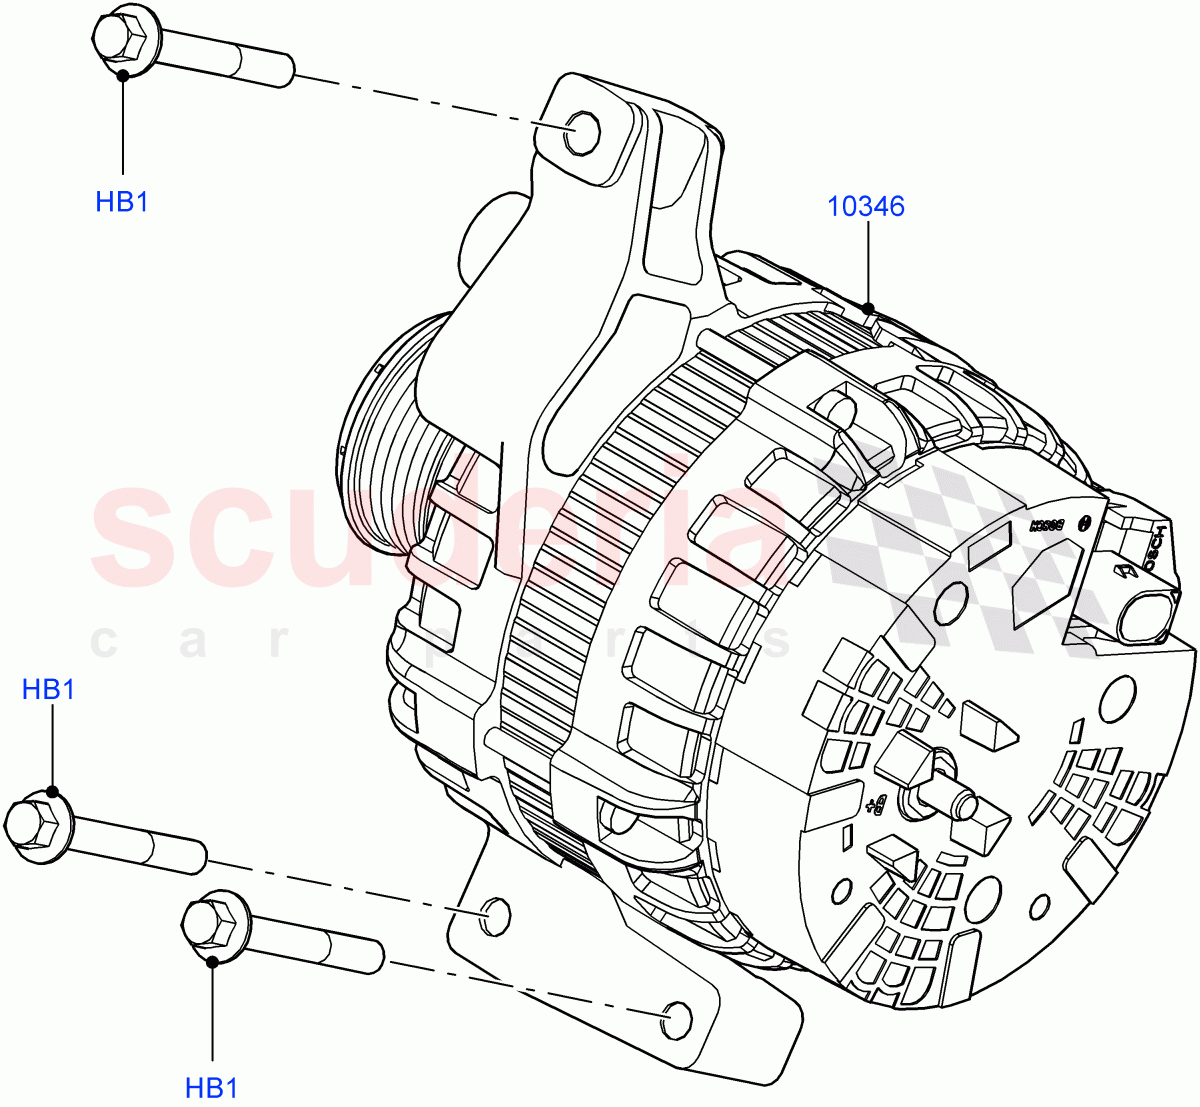 Alternator And Mountings(2.0L 16V TIVCT T/C 240PS Petrol,Changsu (China),2.0L 16V TIVCT T/C Gen2 Petrol)((V)FROMFG000001) of Land Rover Land Rover Discovery Sport (2015+) [2.0 Turbo Petrol AJ200P]